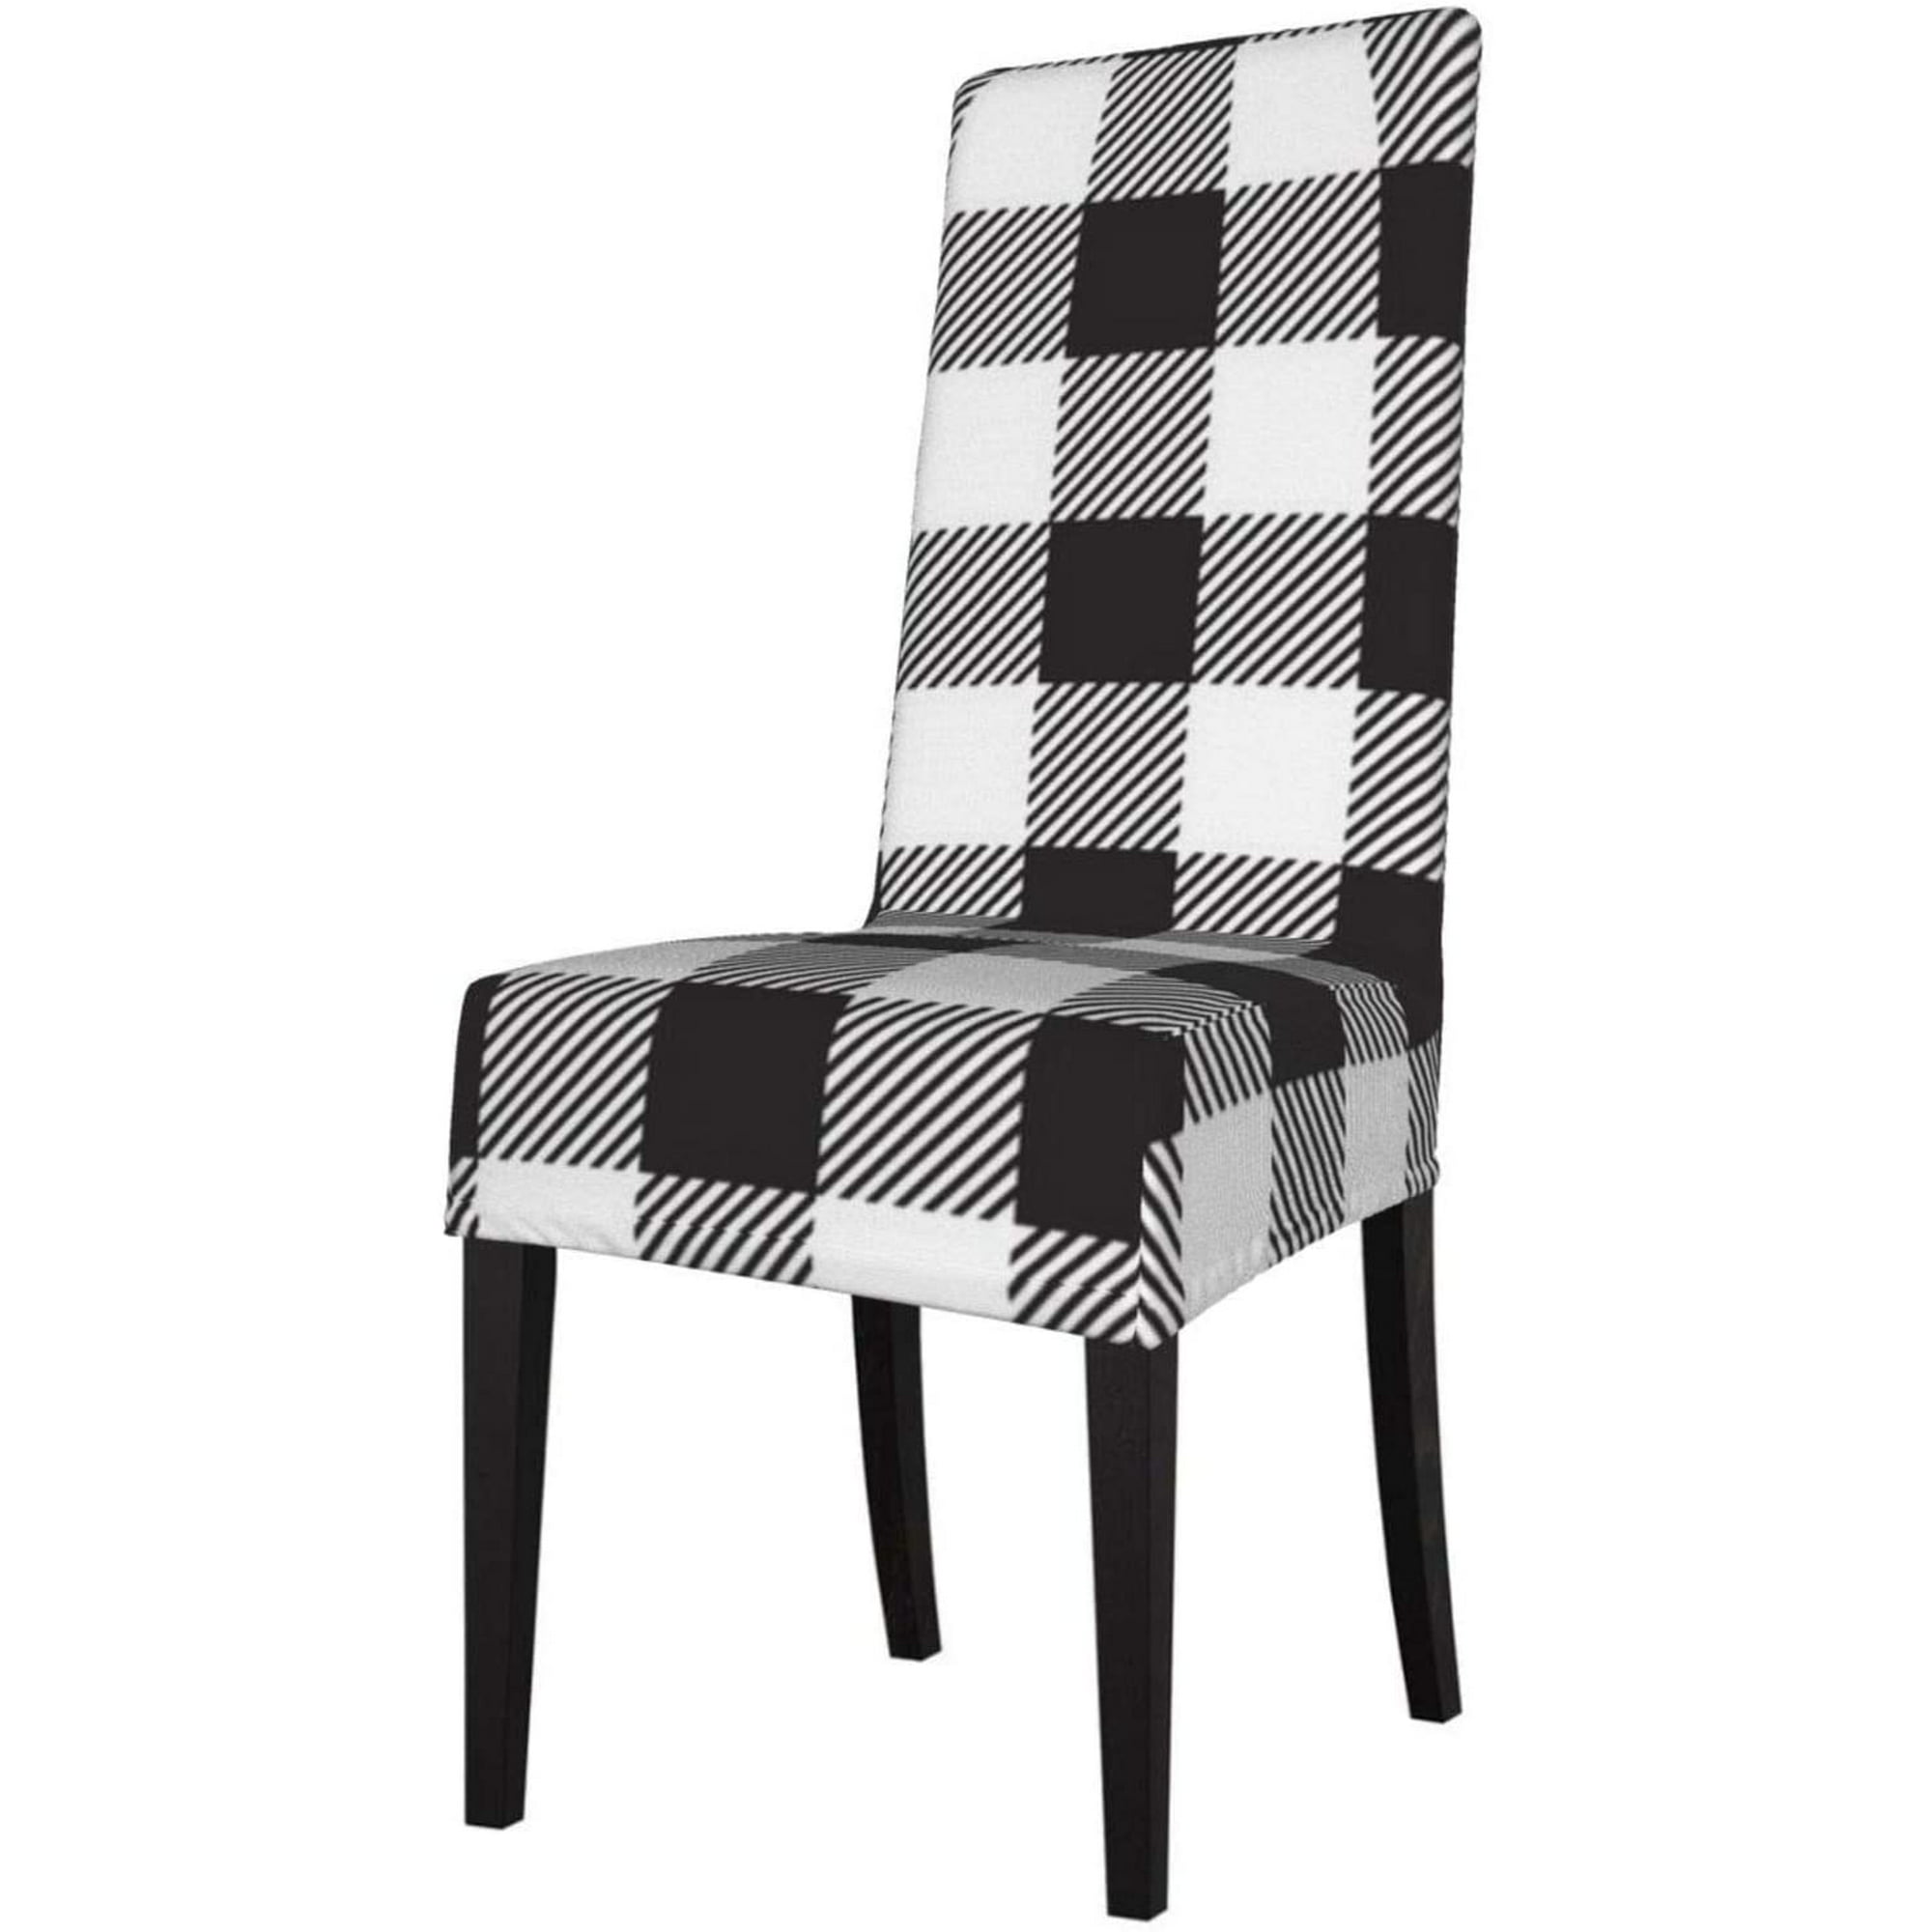 Dining Chair Cover Stretch, Black And White Buffalo Check Dining Room Chair Covers